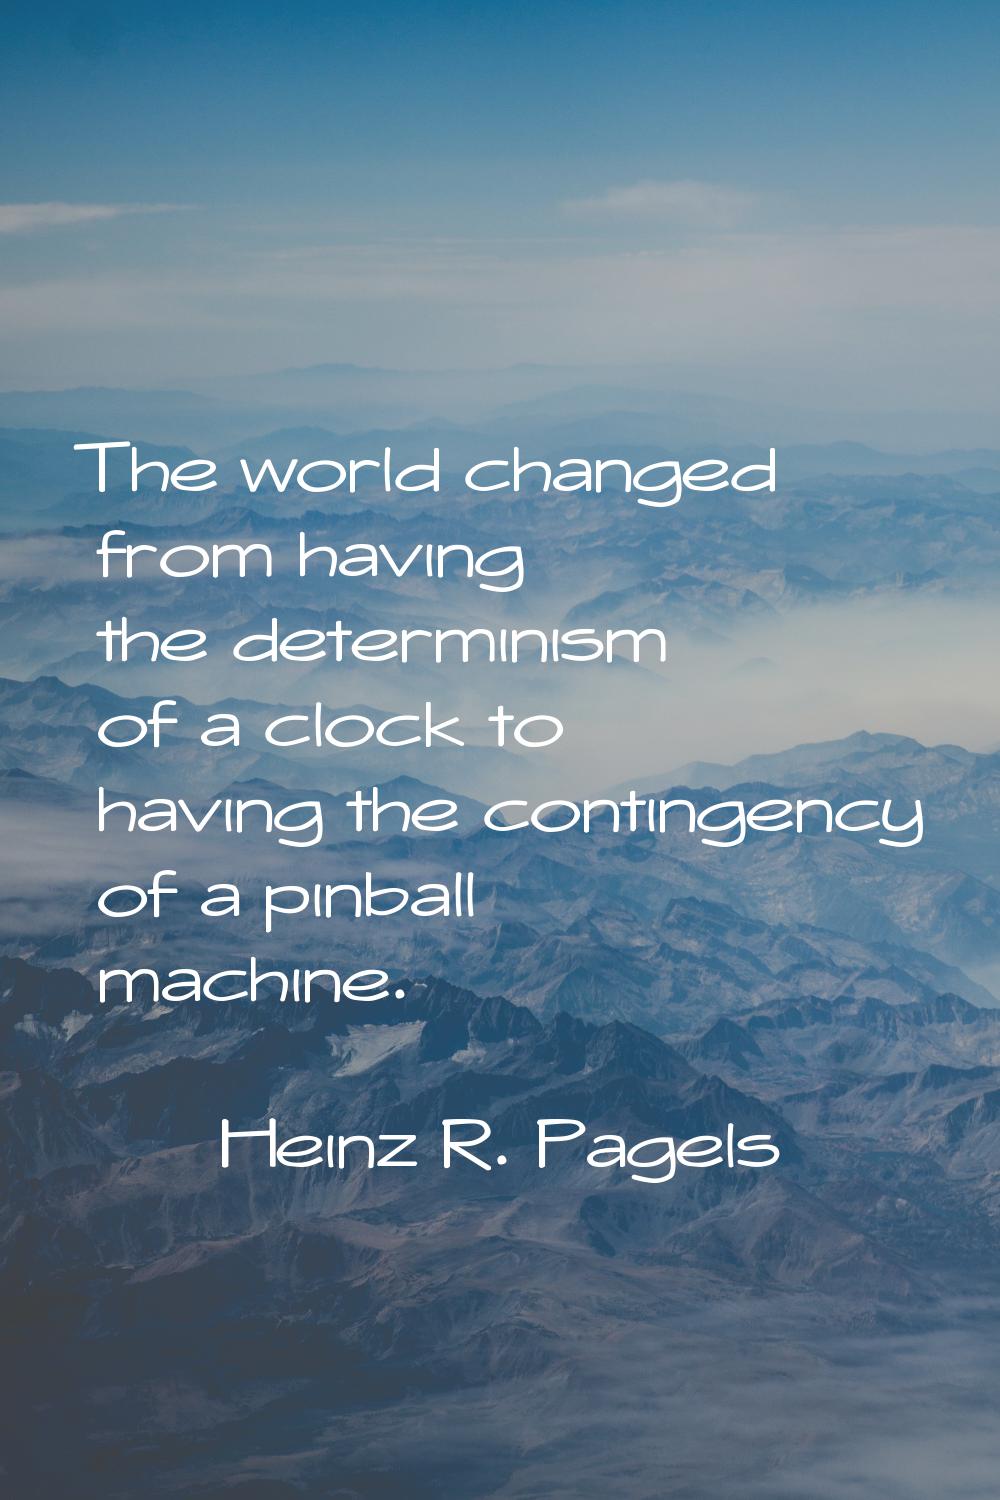 The world changed from having the determinism of a clock to having the contingency of a pinball mac